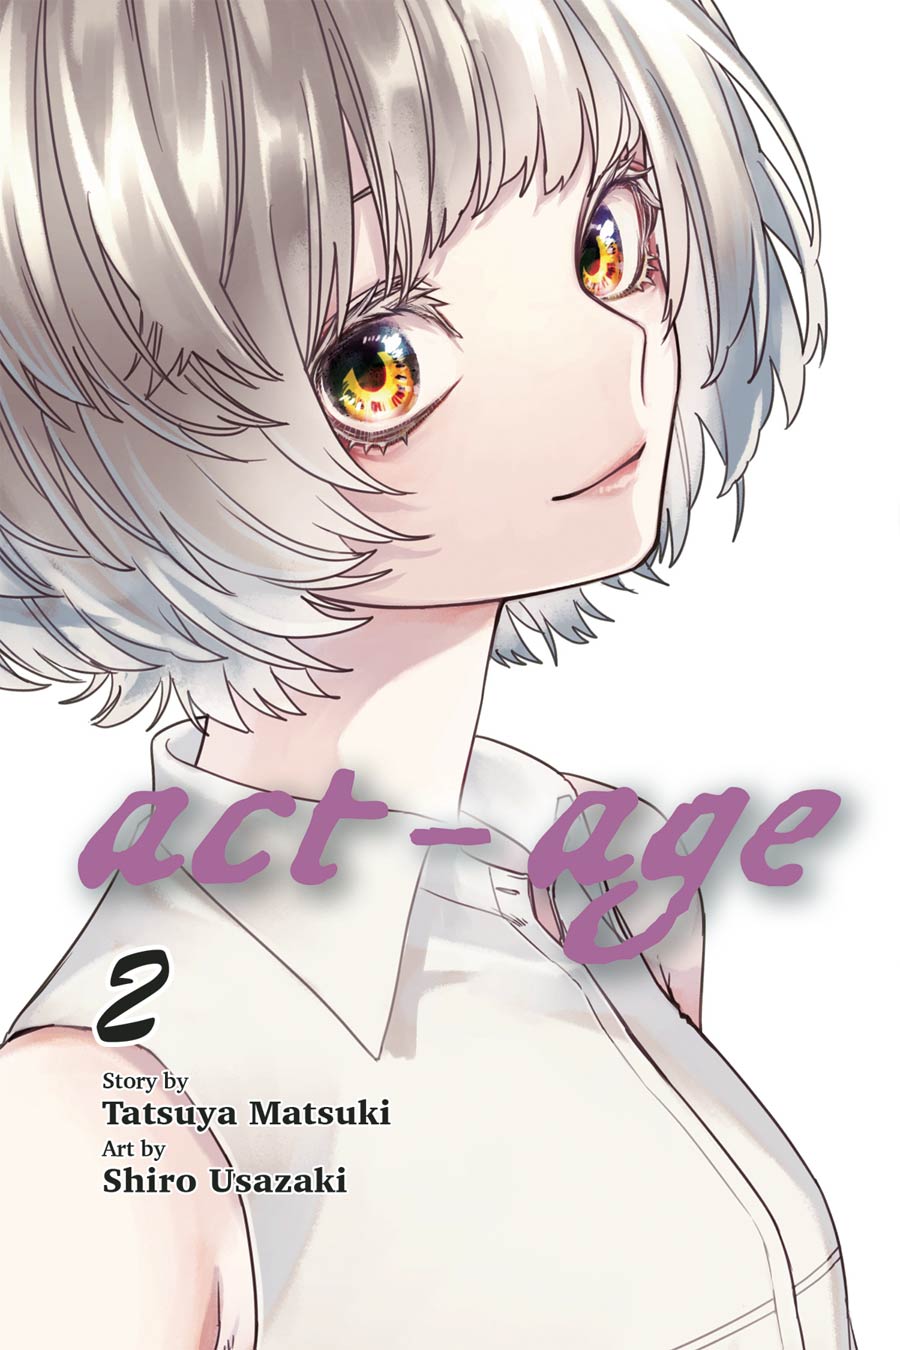 Act-Age Vol 2 GN